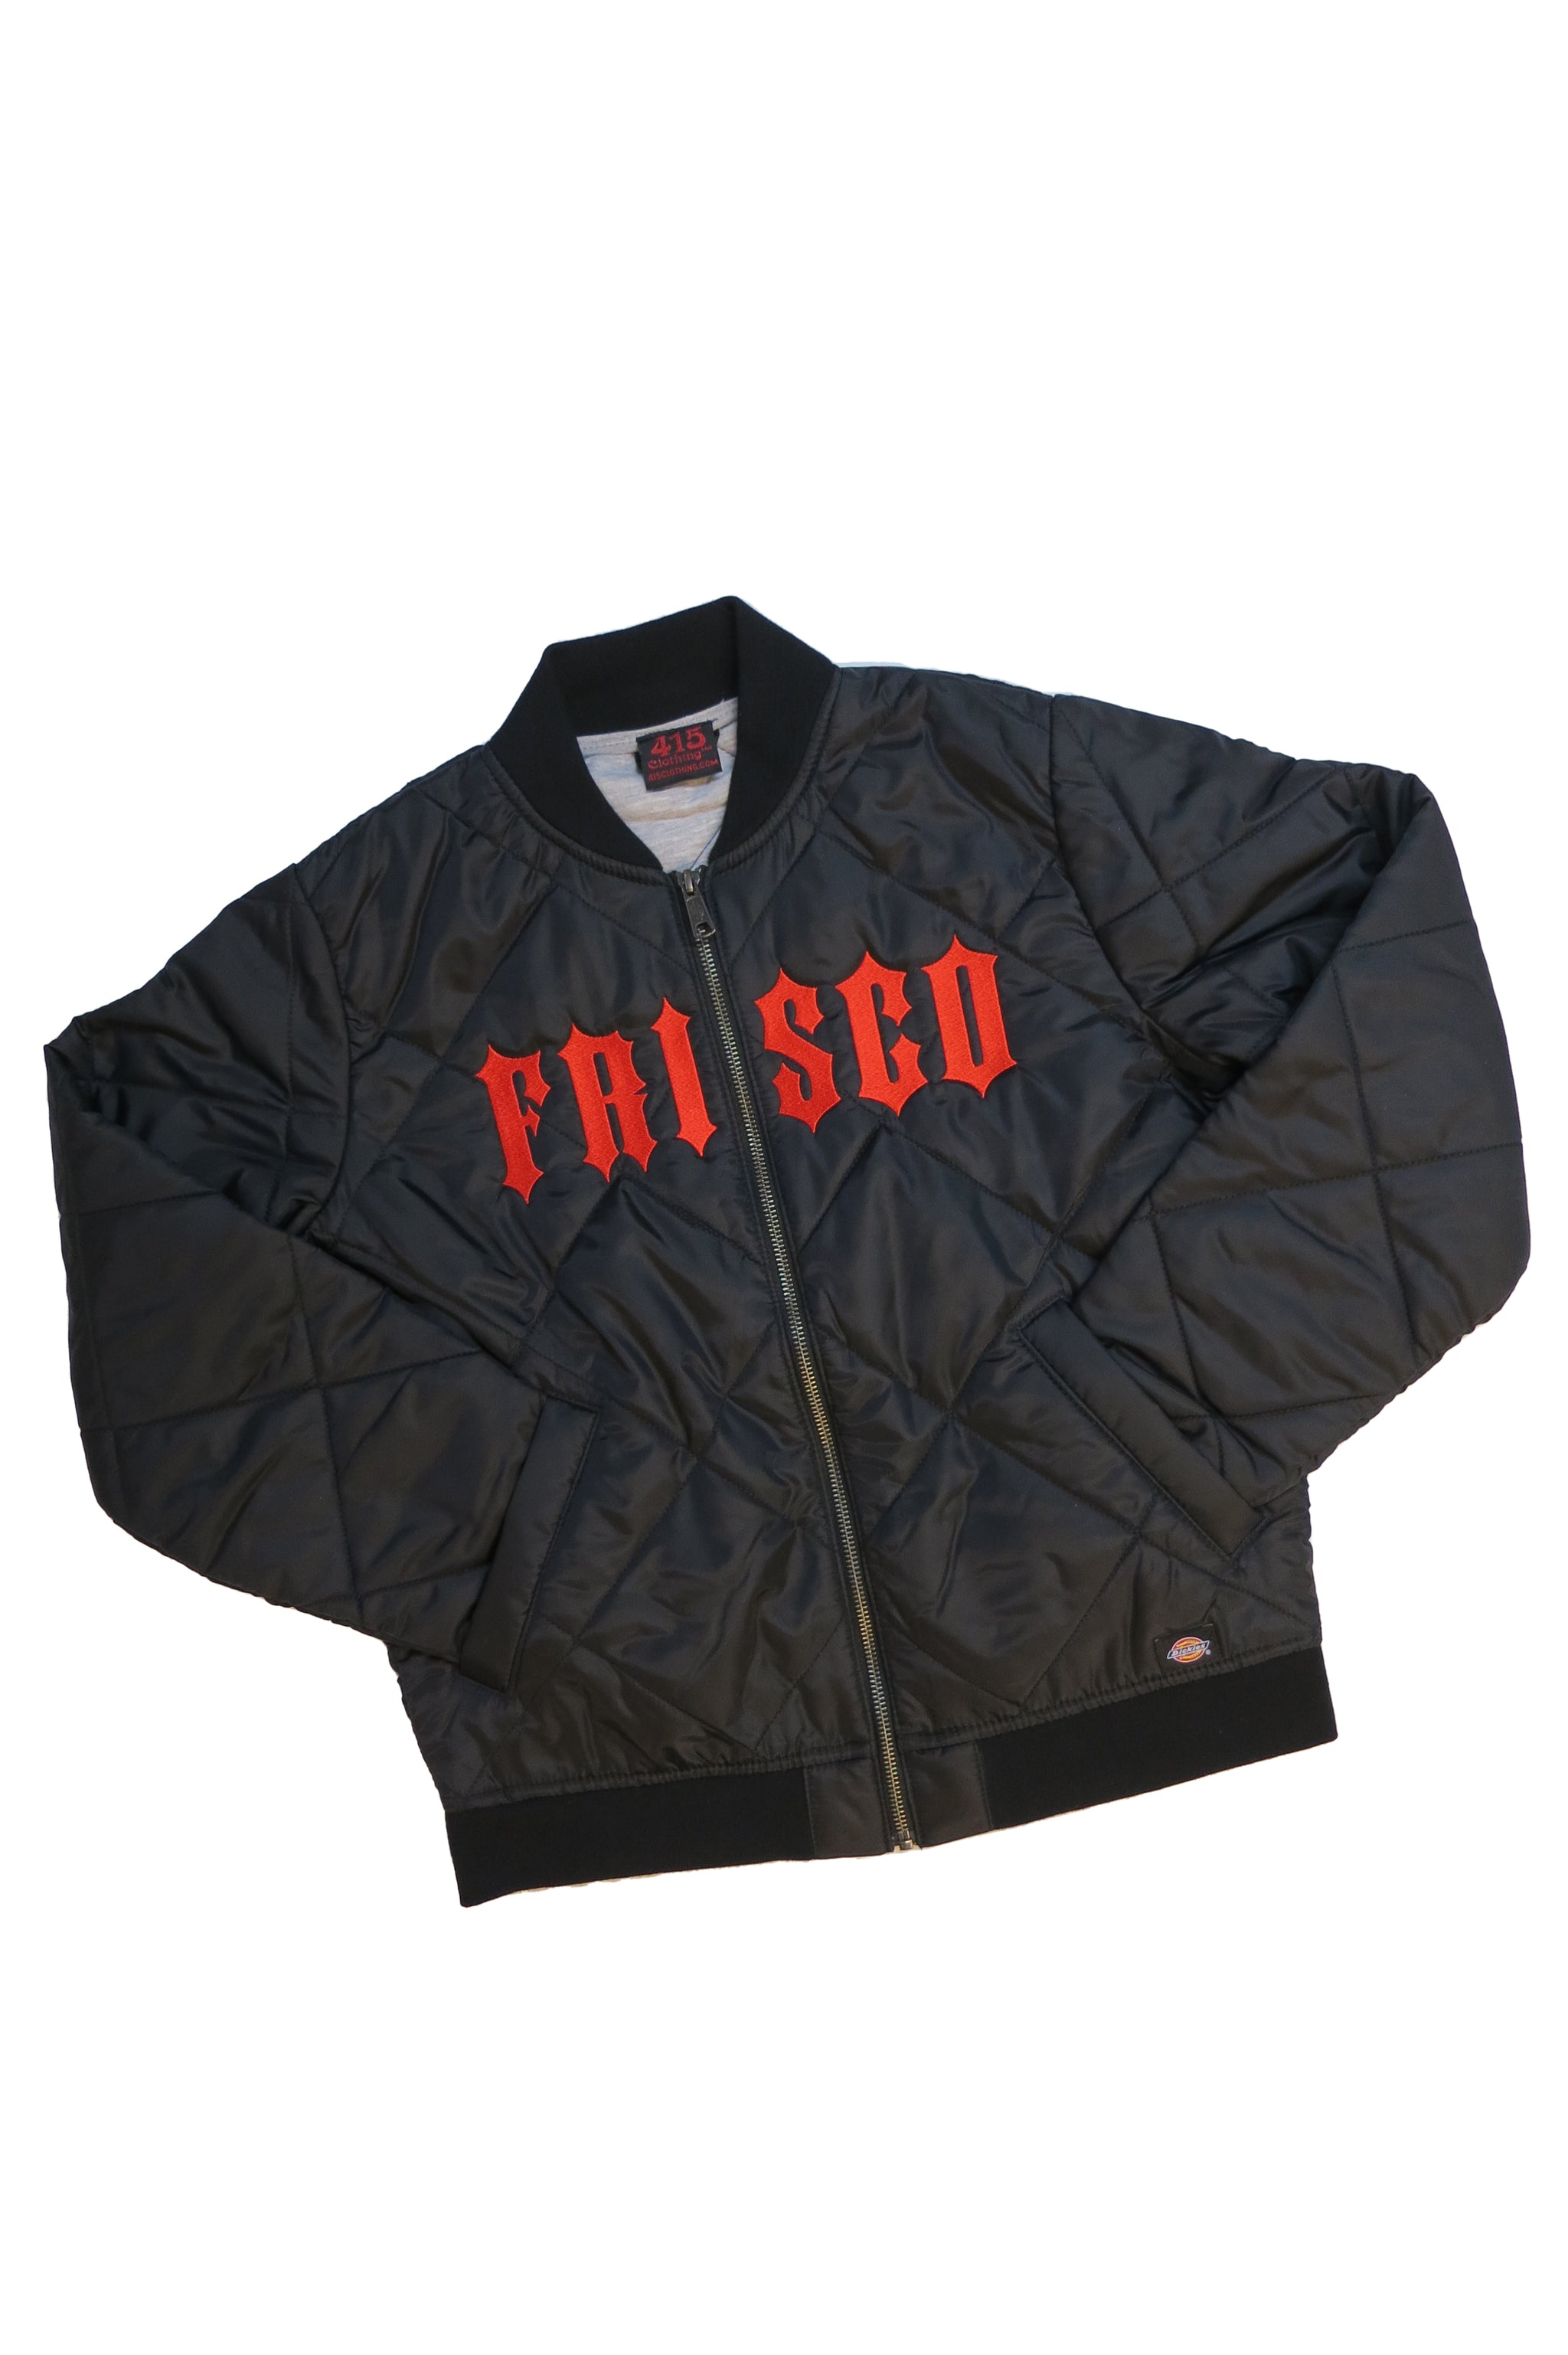 Ladies Frisco 415 Embroidered Quilted Bomber - 415 Clothing, Inc.